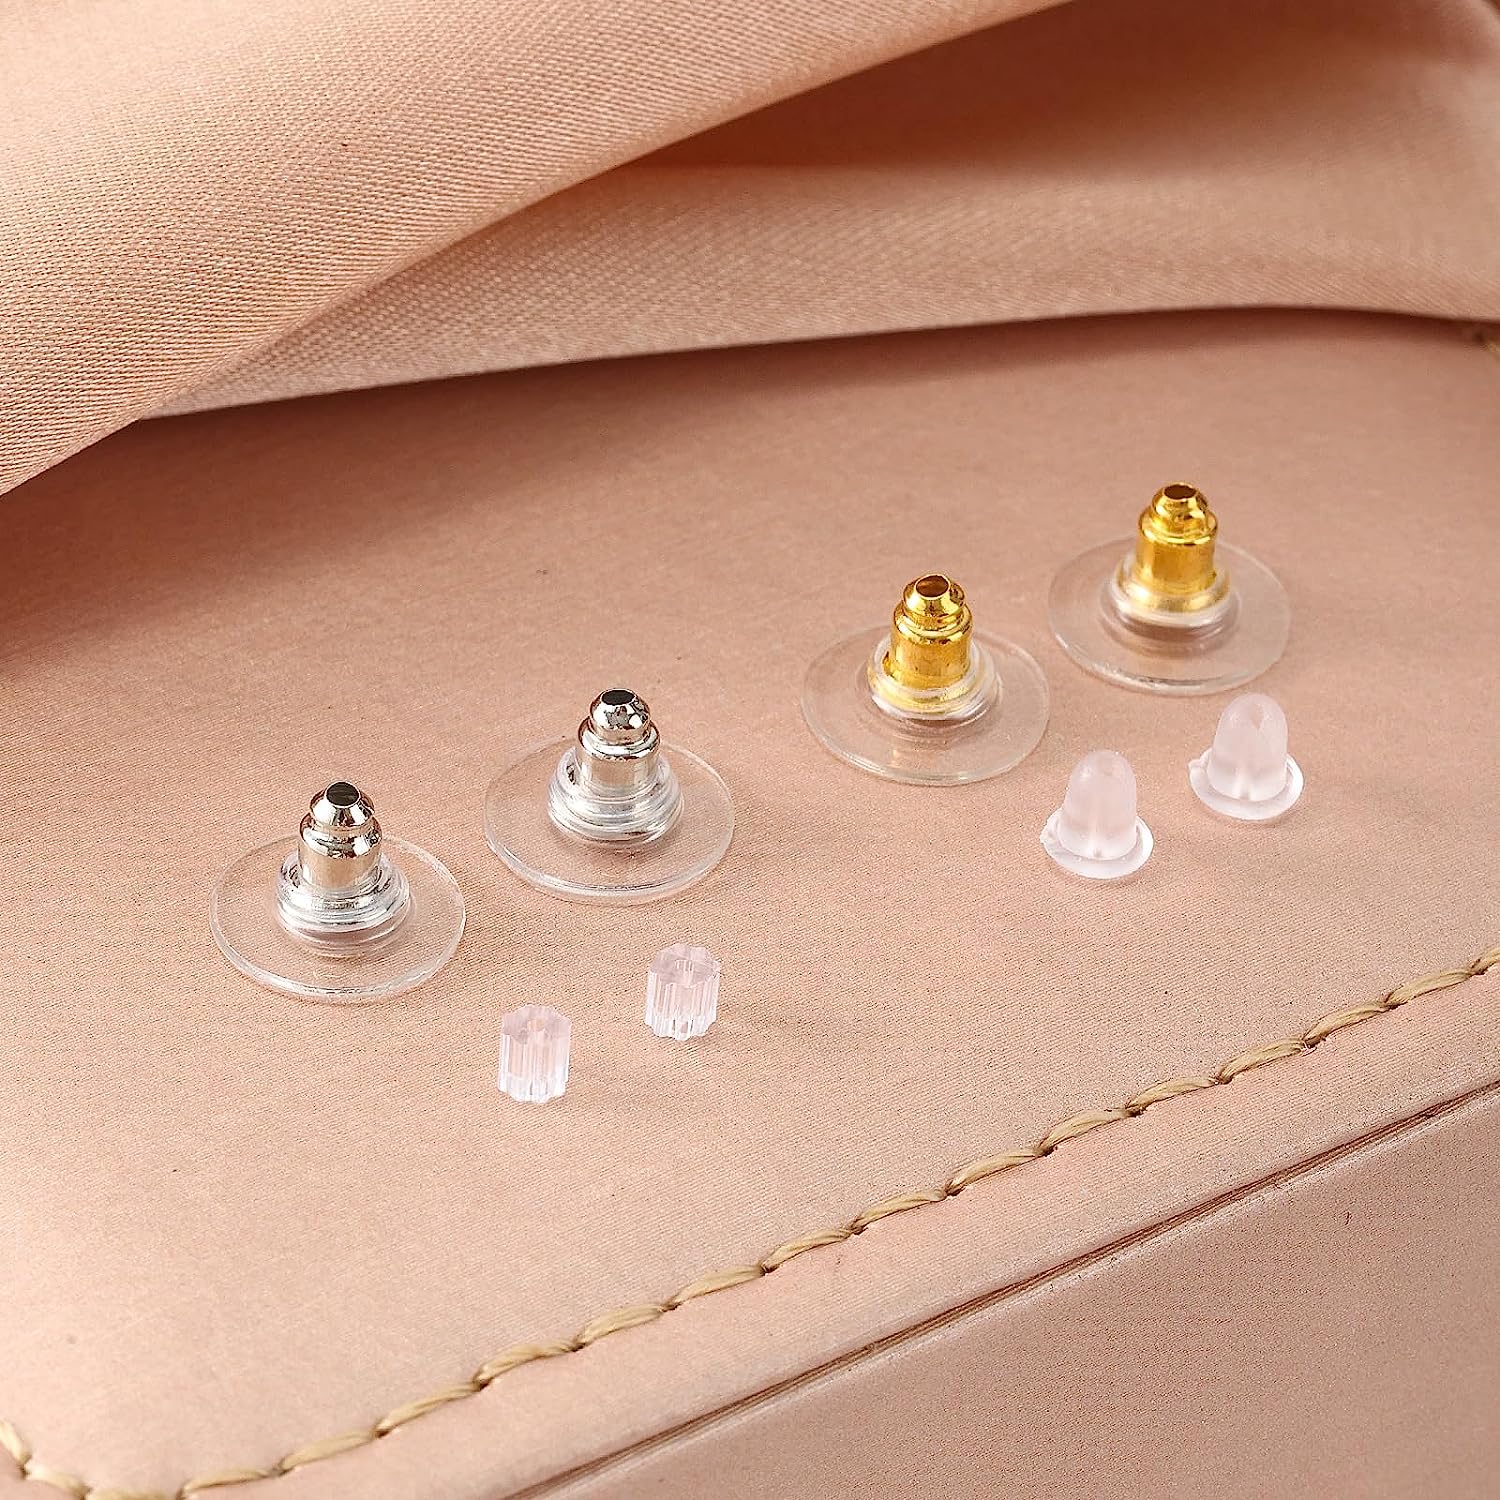 Silicone Earring Backs, 800 Pcs Soft Rubber Earring Stoppers, Clear Earring  Backing Replacement for Stud Post Fishhook Earrings(4 Styles) 